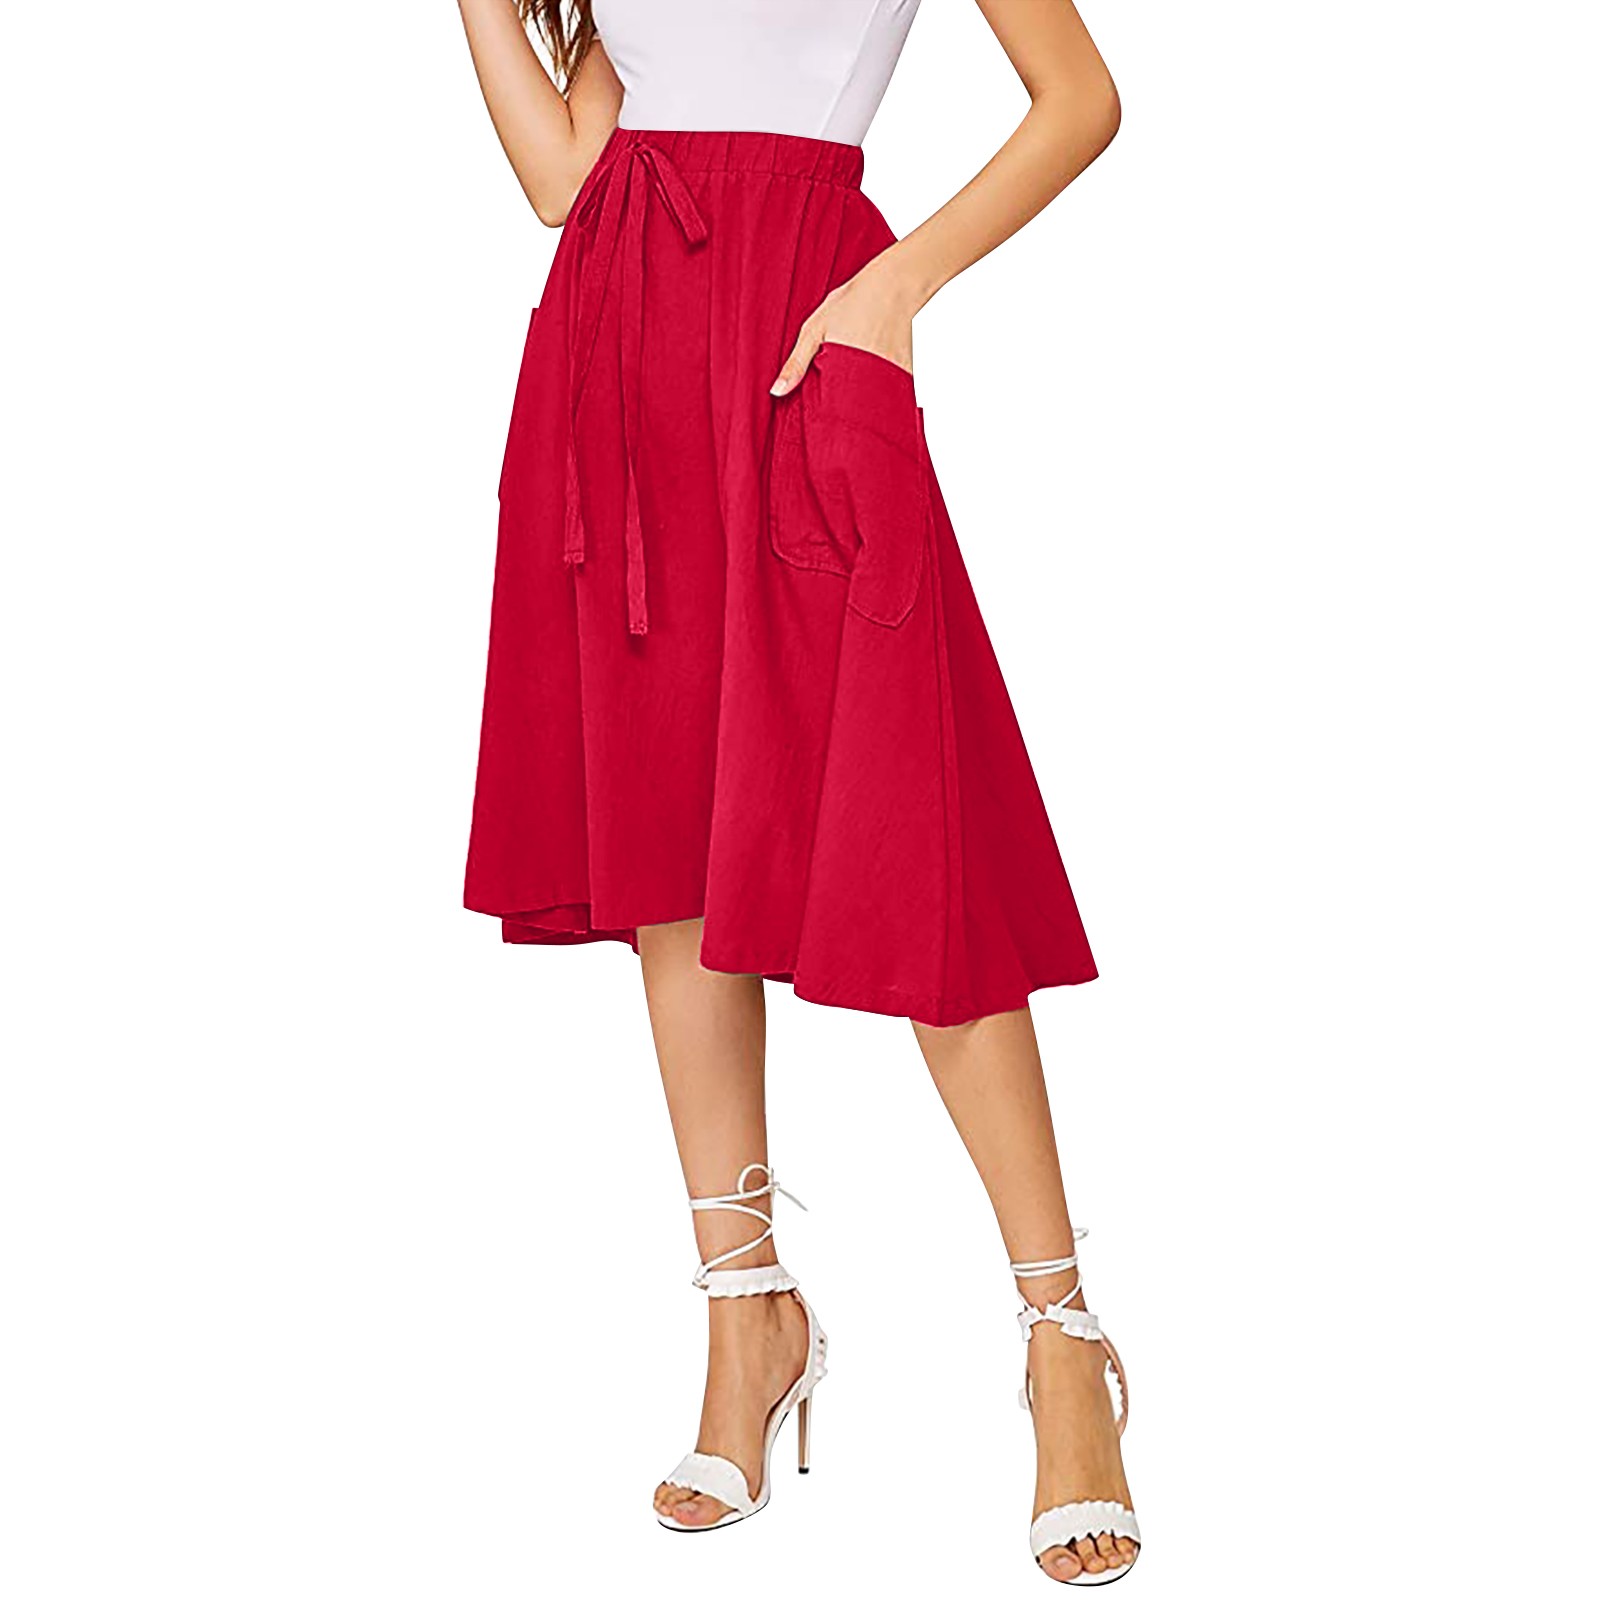 Spentoper Women's Casual High Waist Pleated A Line Midi Skirt With ...